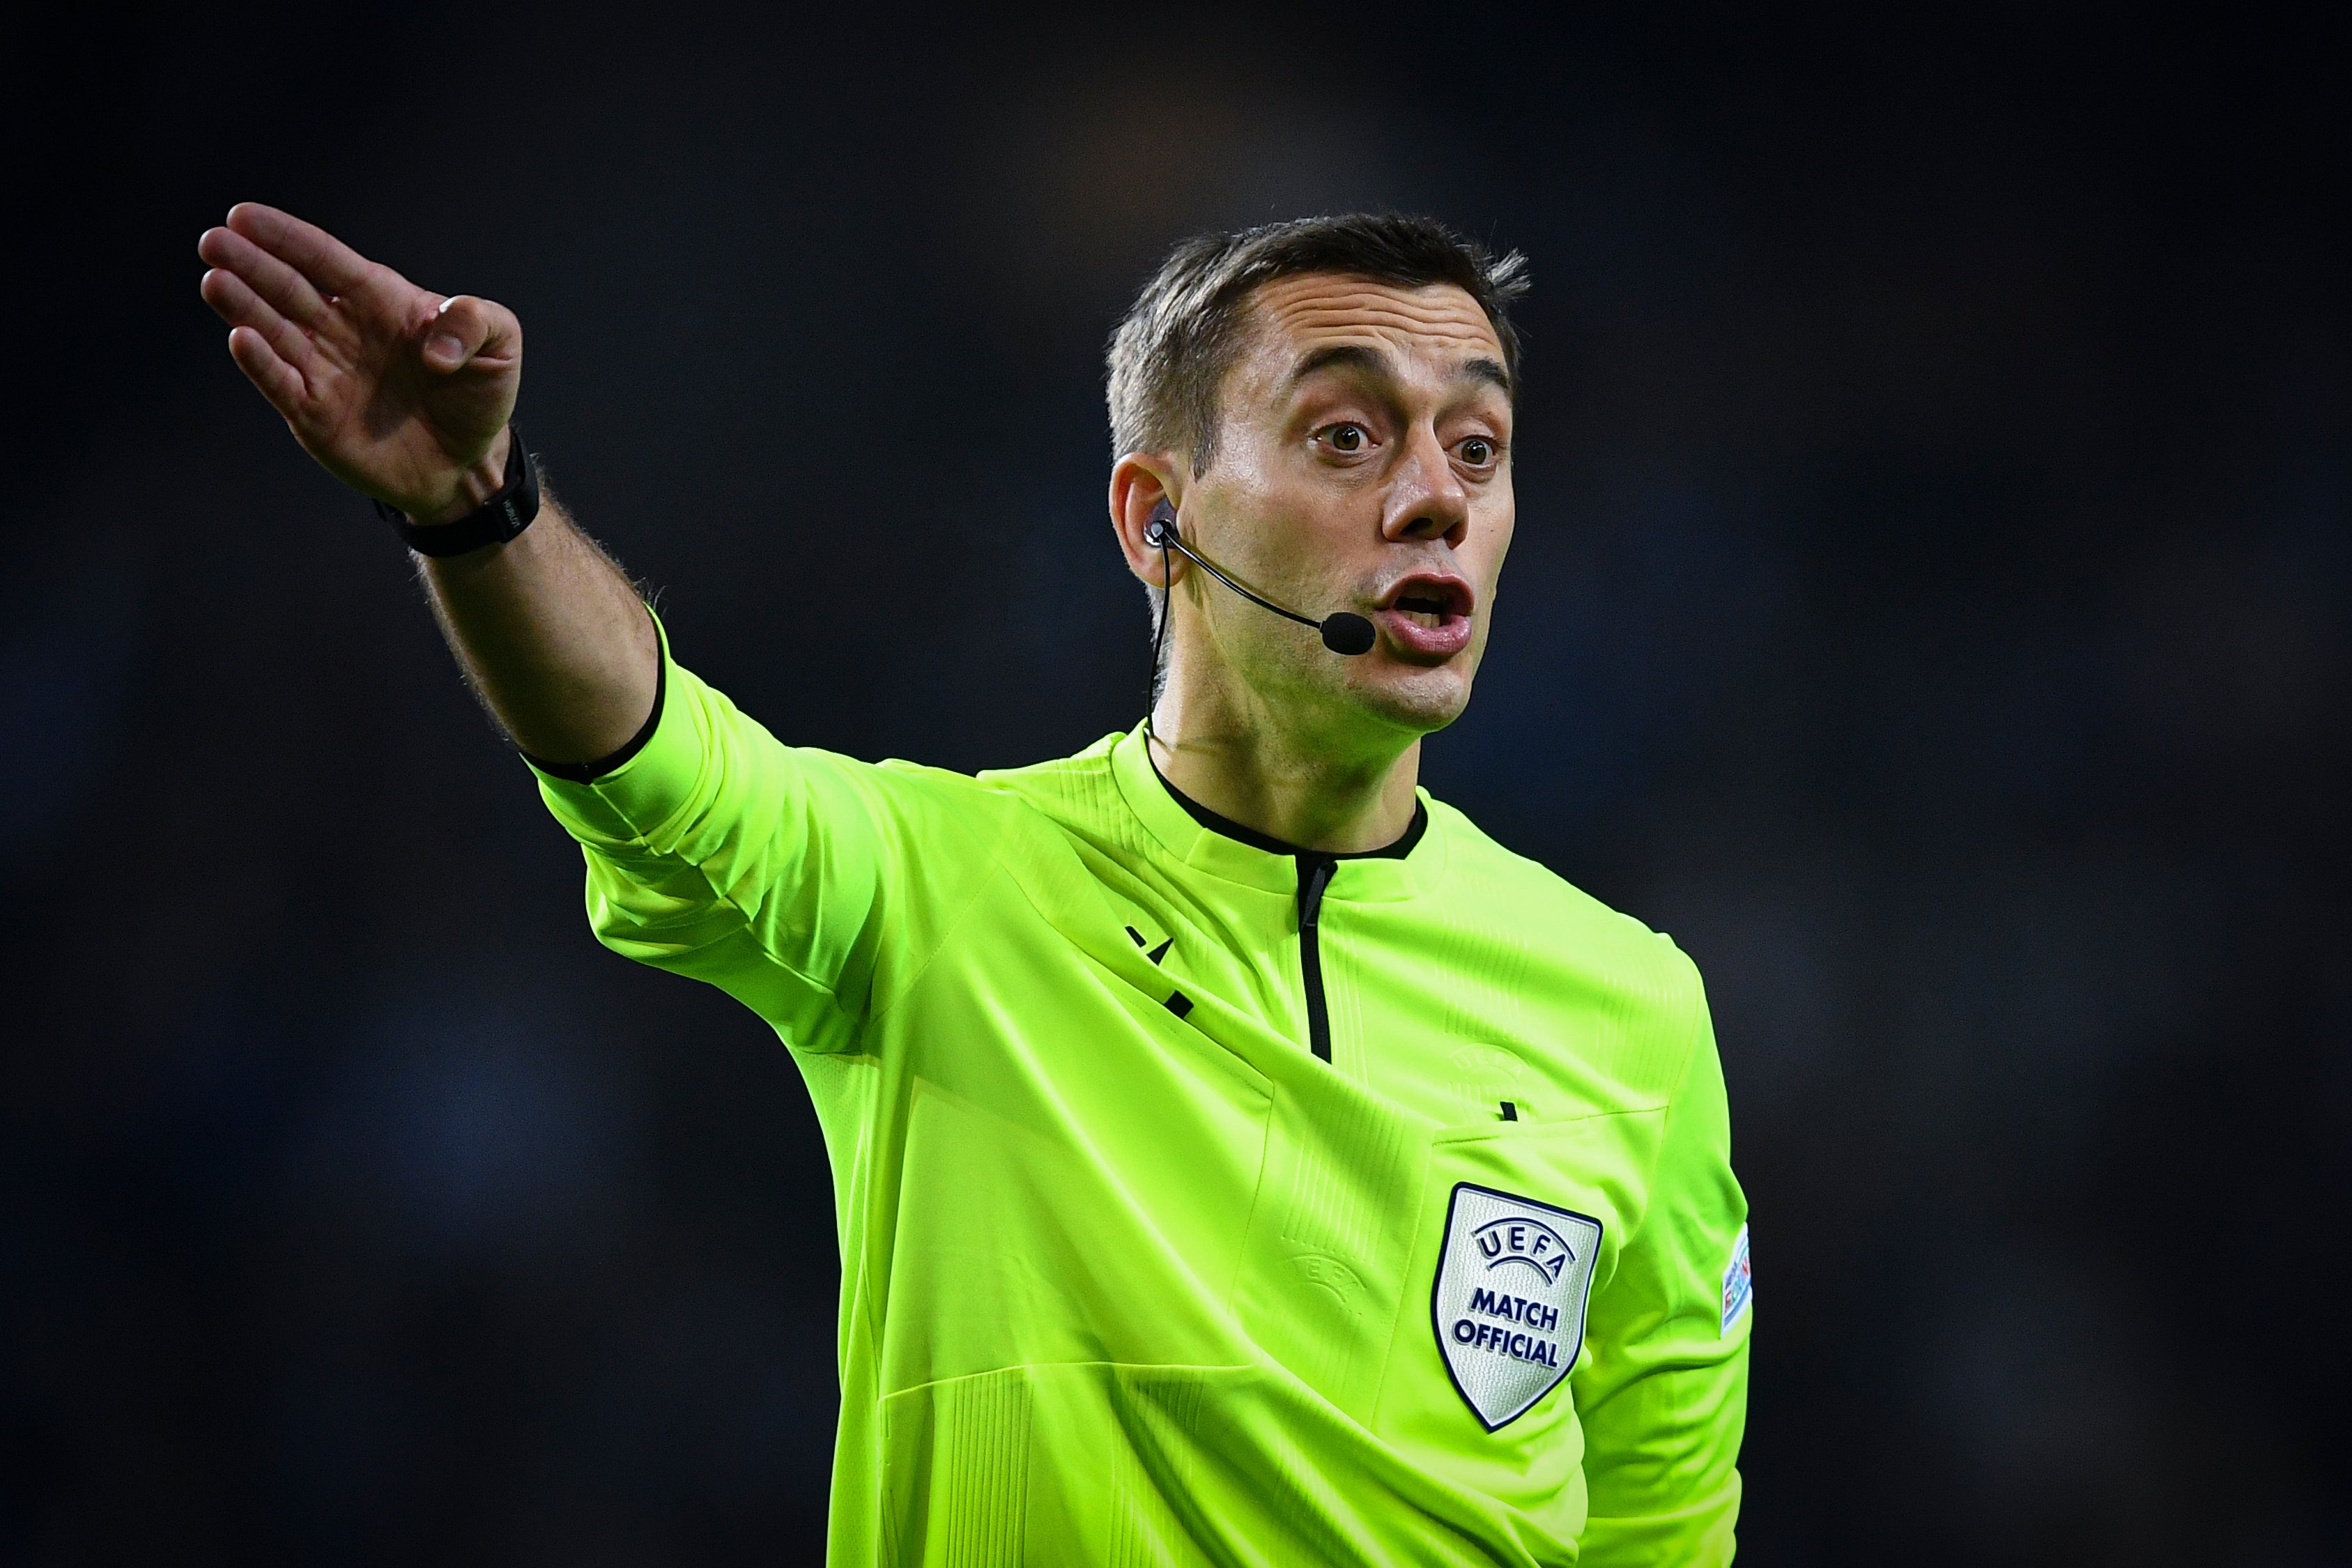 The Frenchman will officiate Saturday’s final